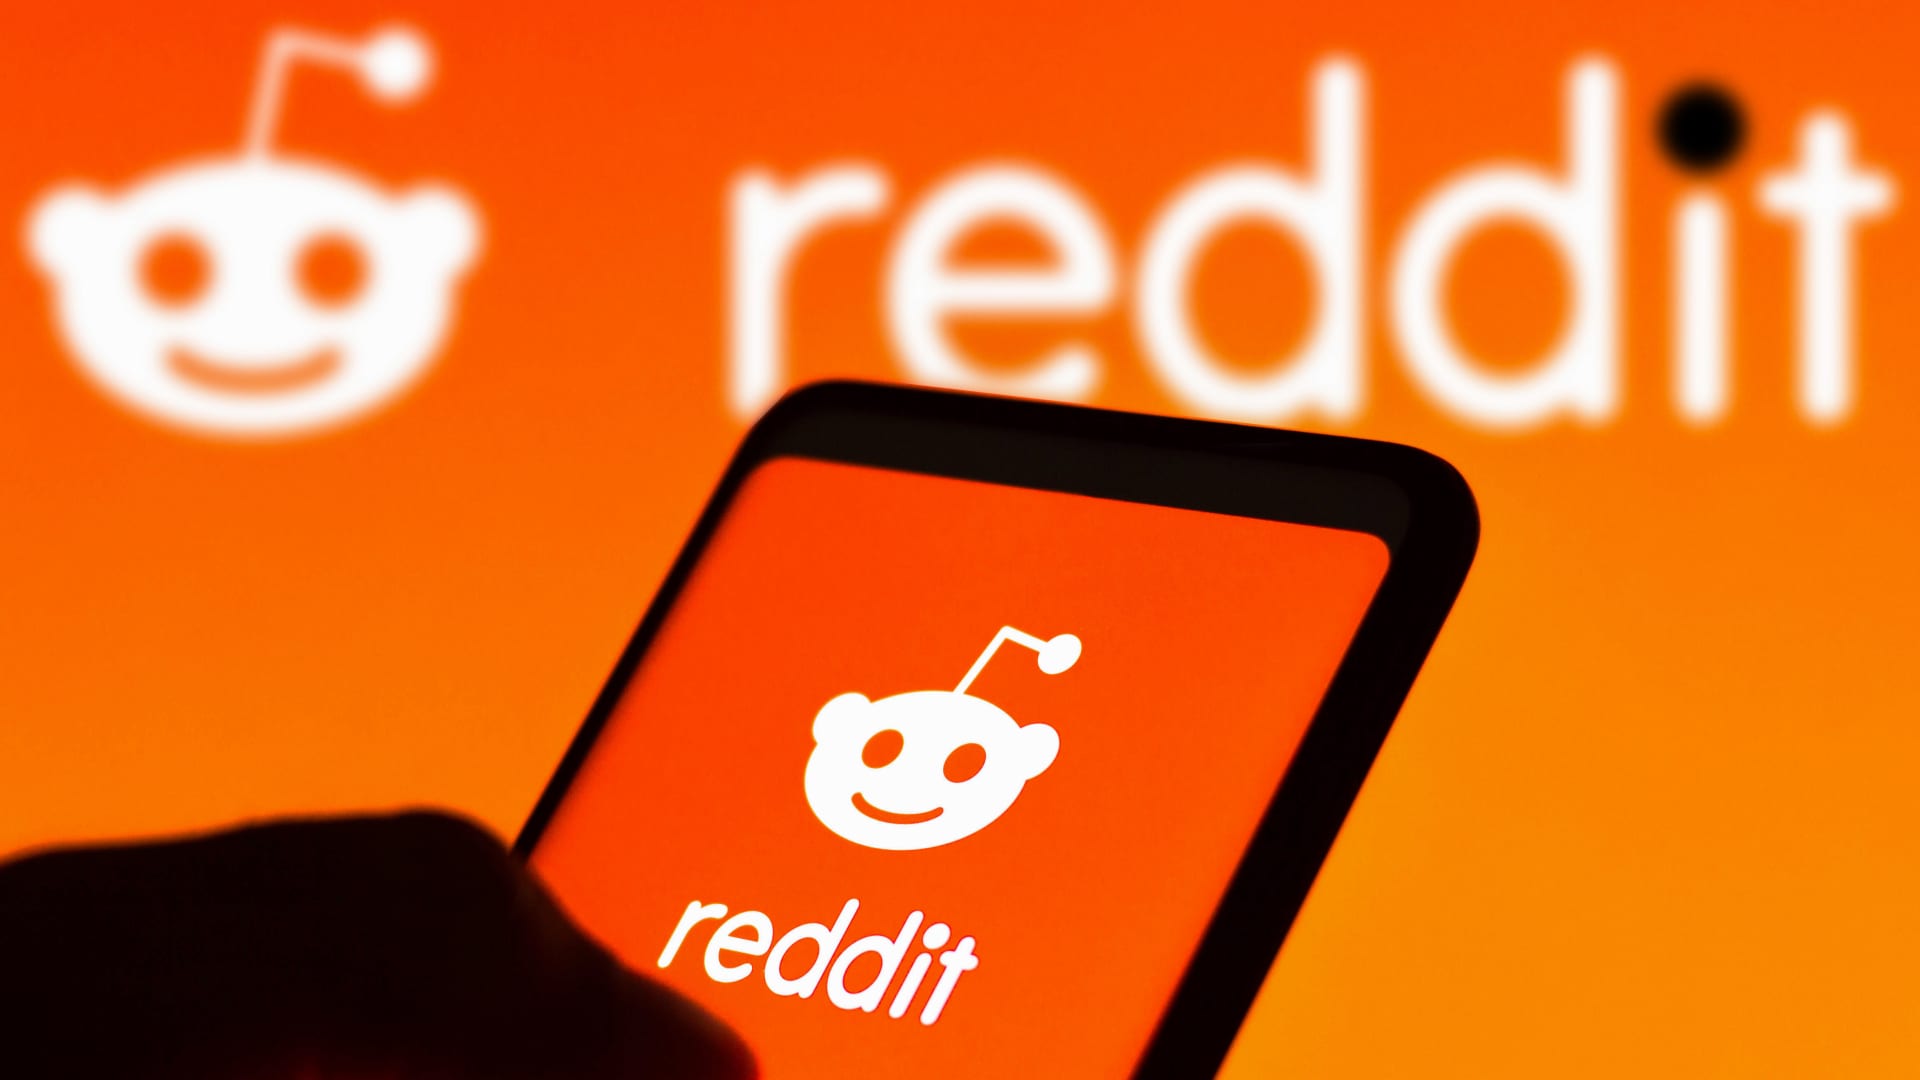 Reddit is in crisis as prominent moderators loudly protest the company’s treatment of developers